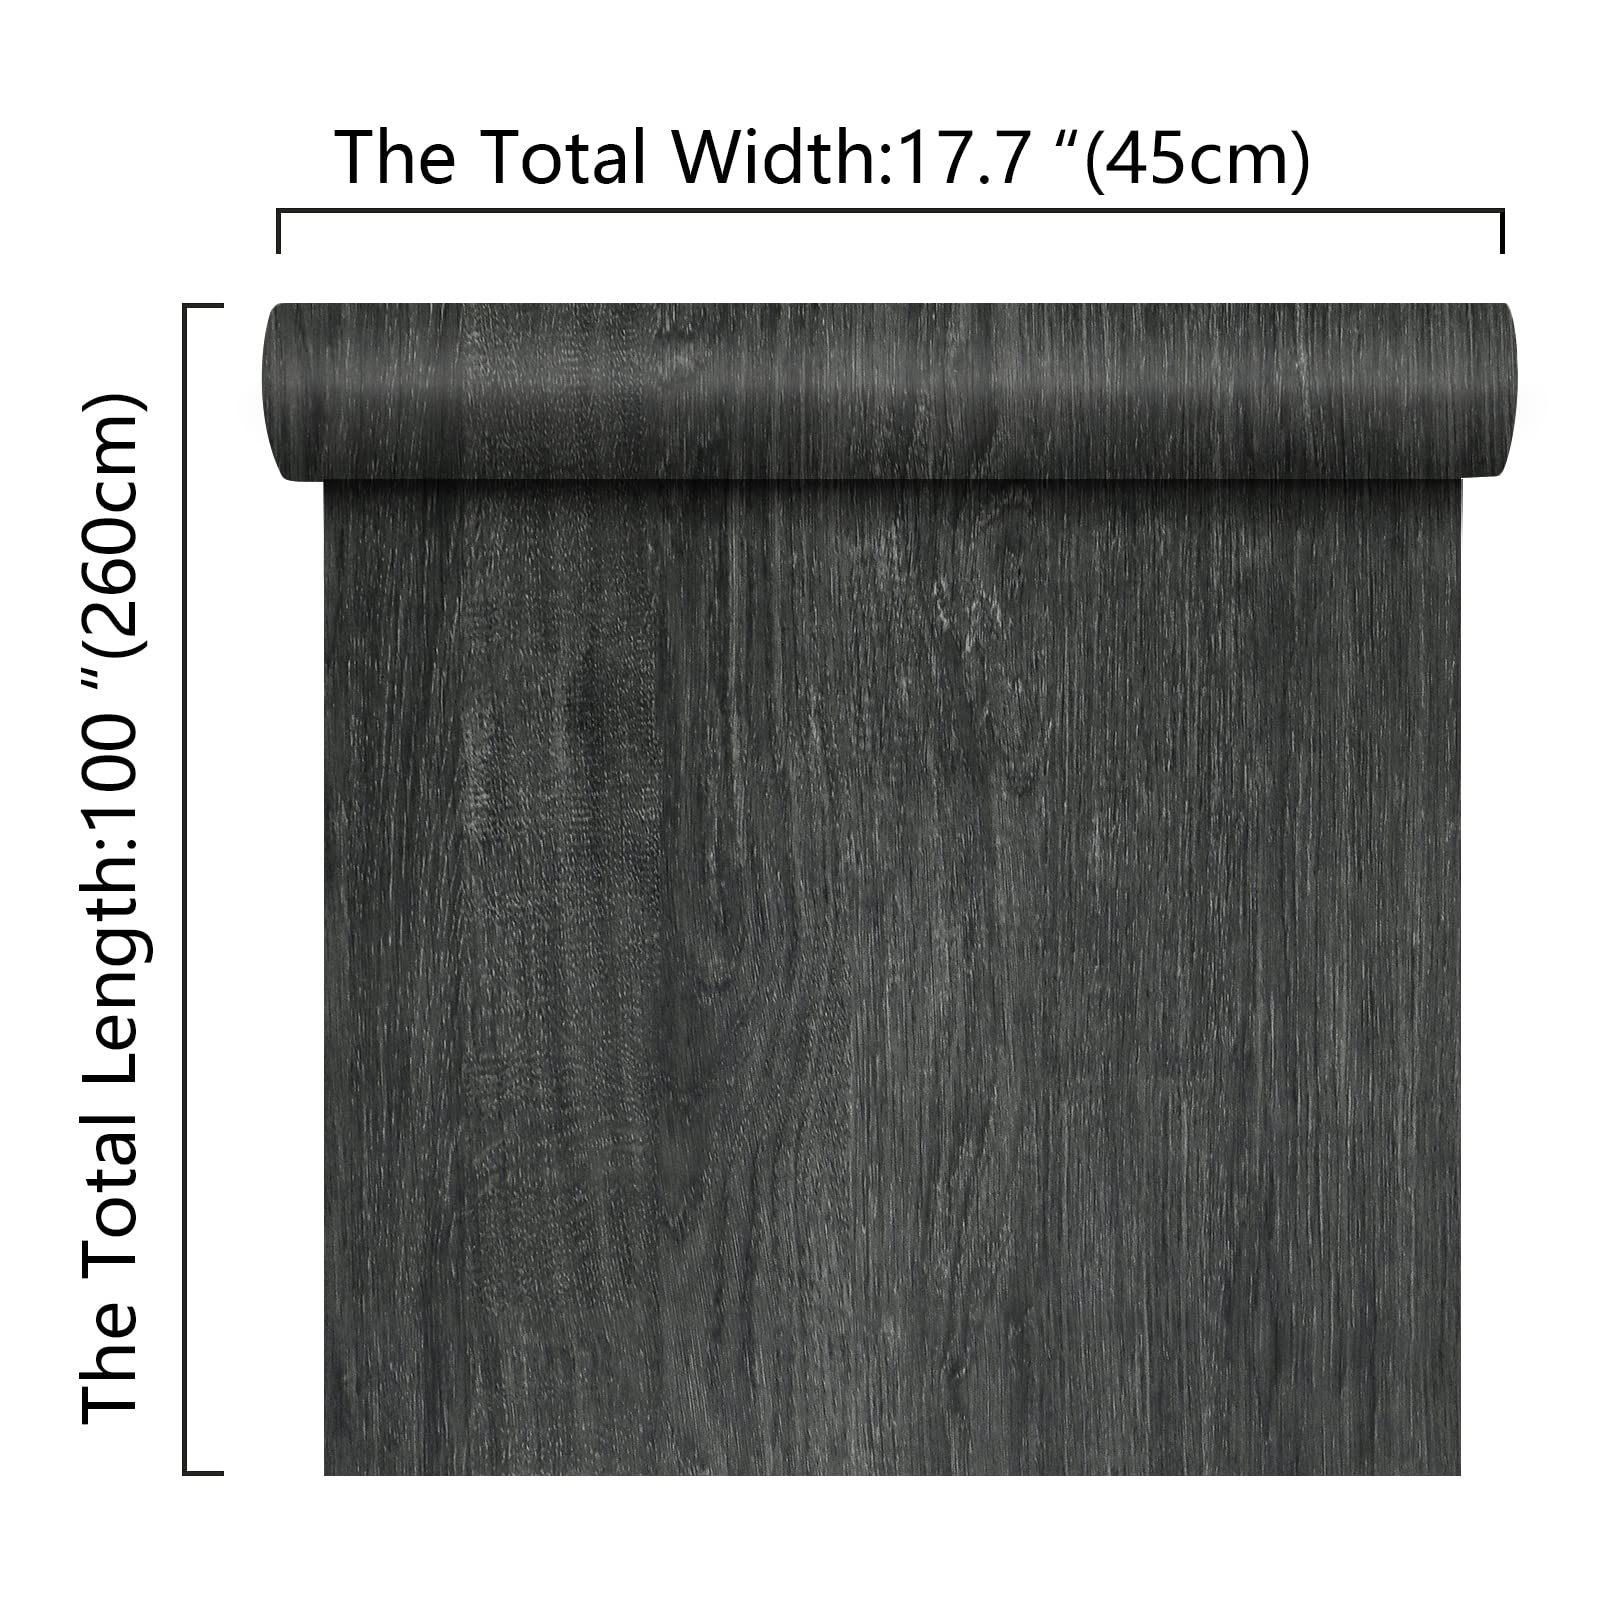 17.7''x100'' Dark Grey Wood Peel and Stick Wallpaper Thick Self-Adhesive Removable Wallpaper Wood Decorative Wall Covering Rustic Wood Grain Contact Paper Waterproof Vinyl Film for Countertops Cabinet